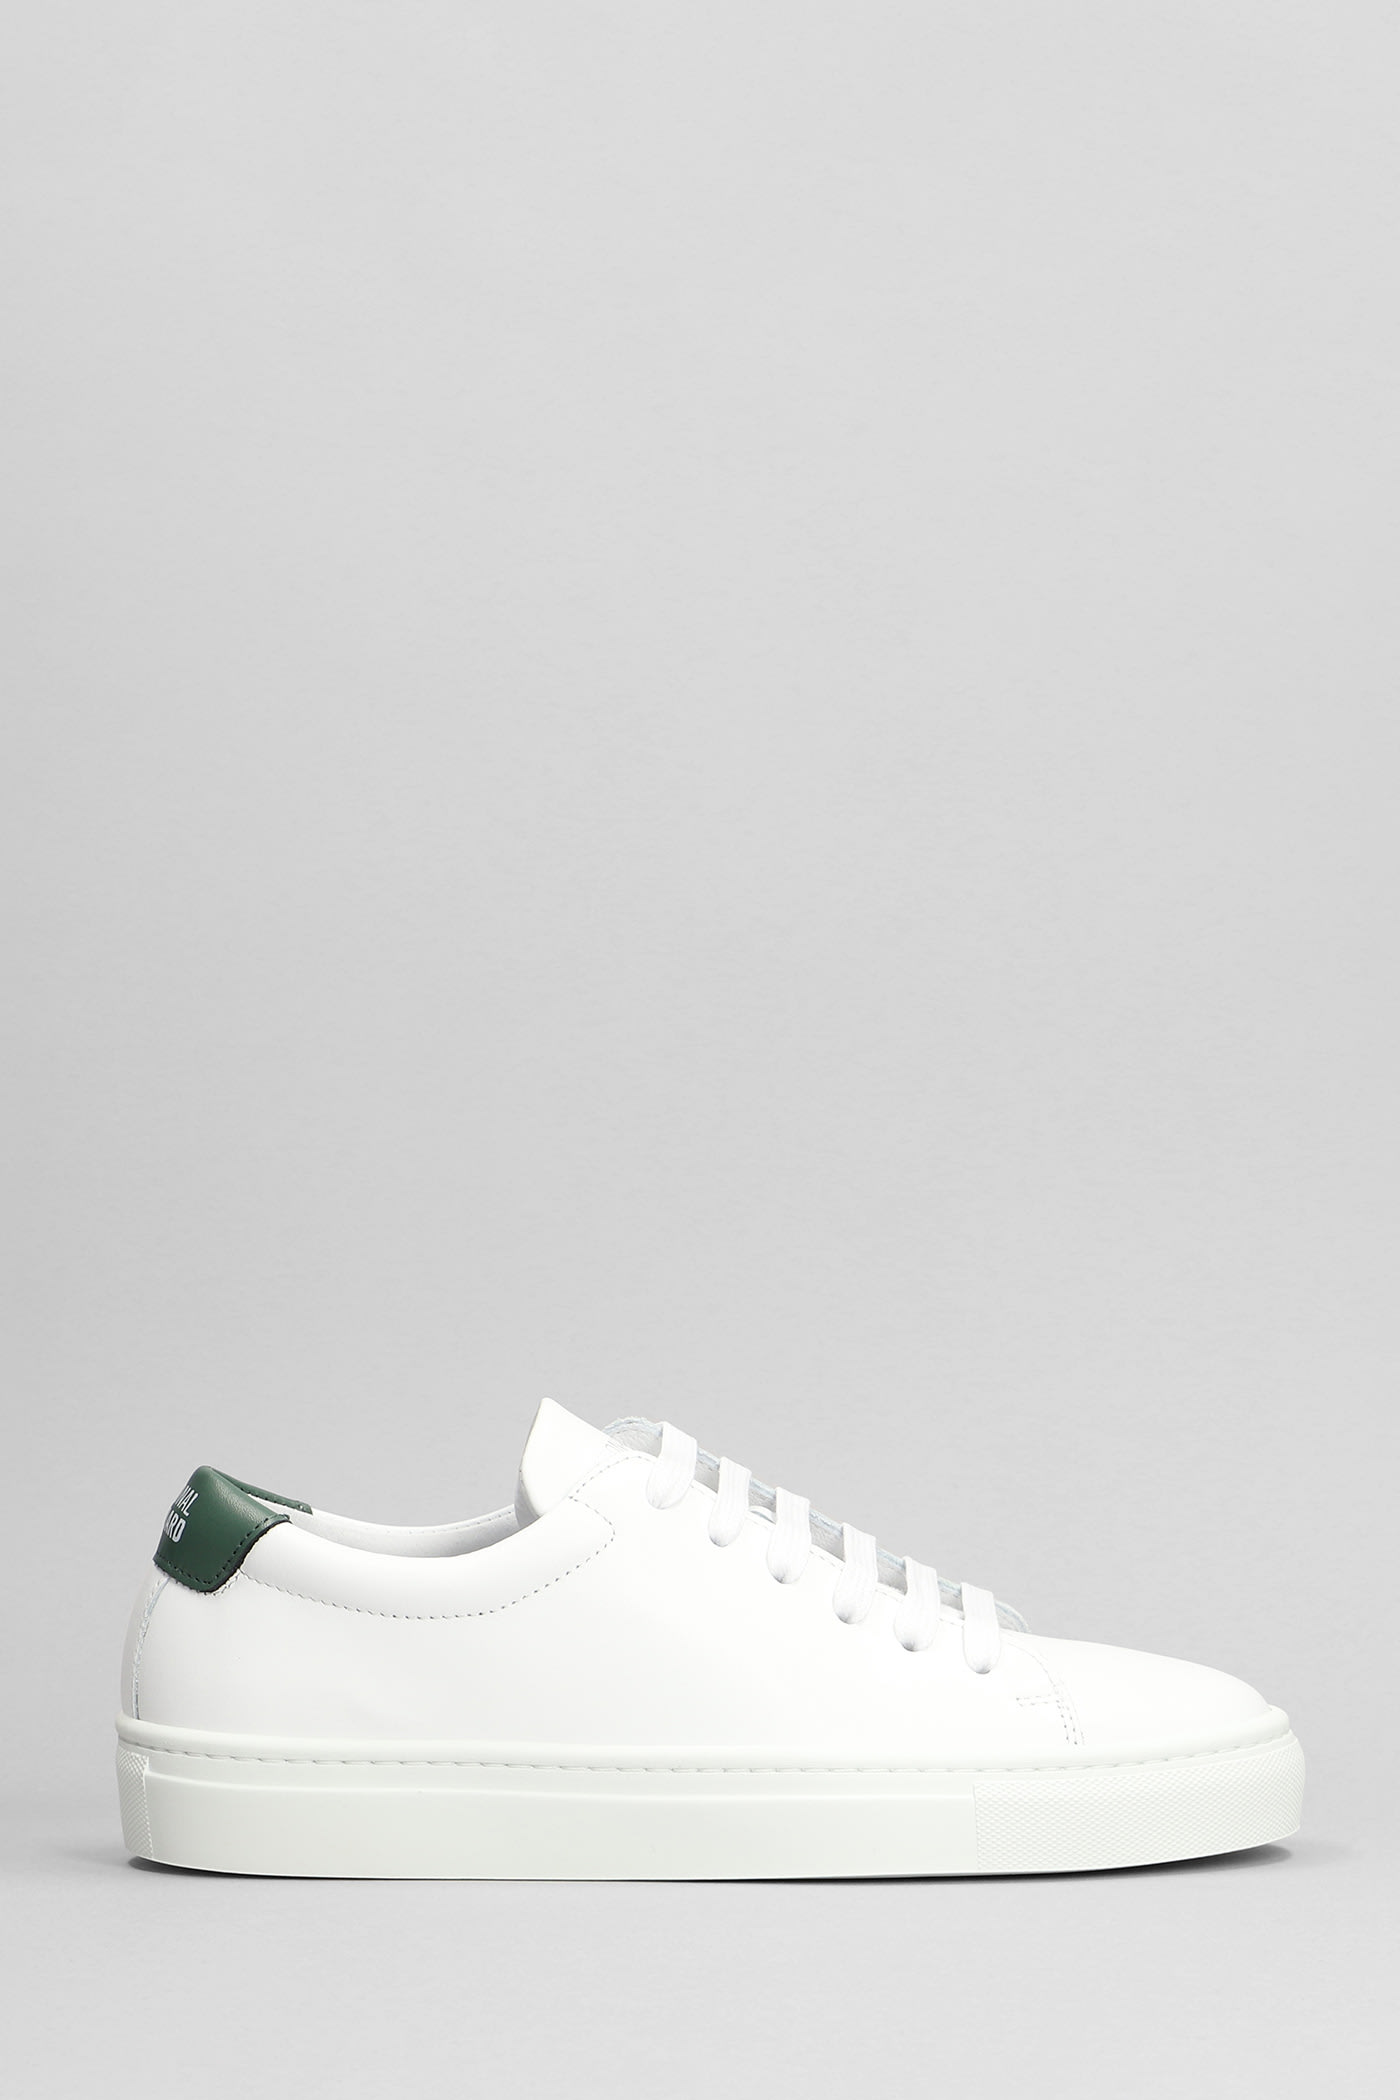 Edition 3 Low Sneakers In White Leather